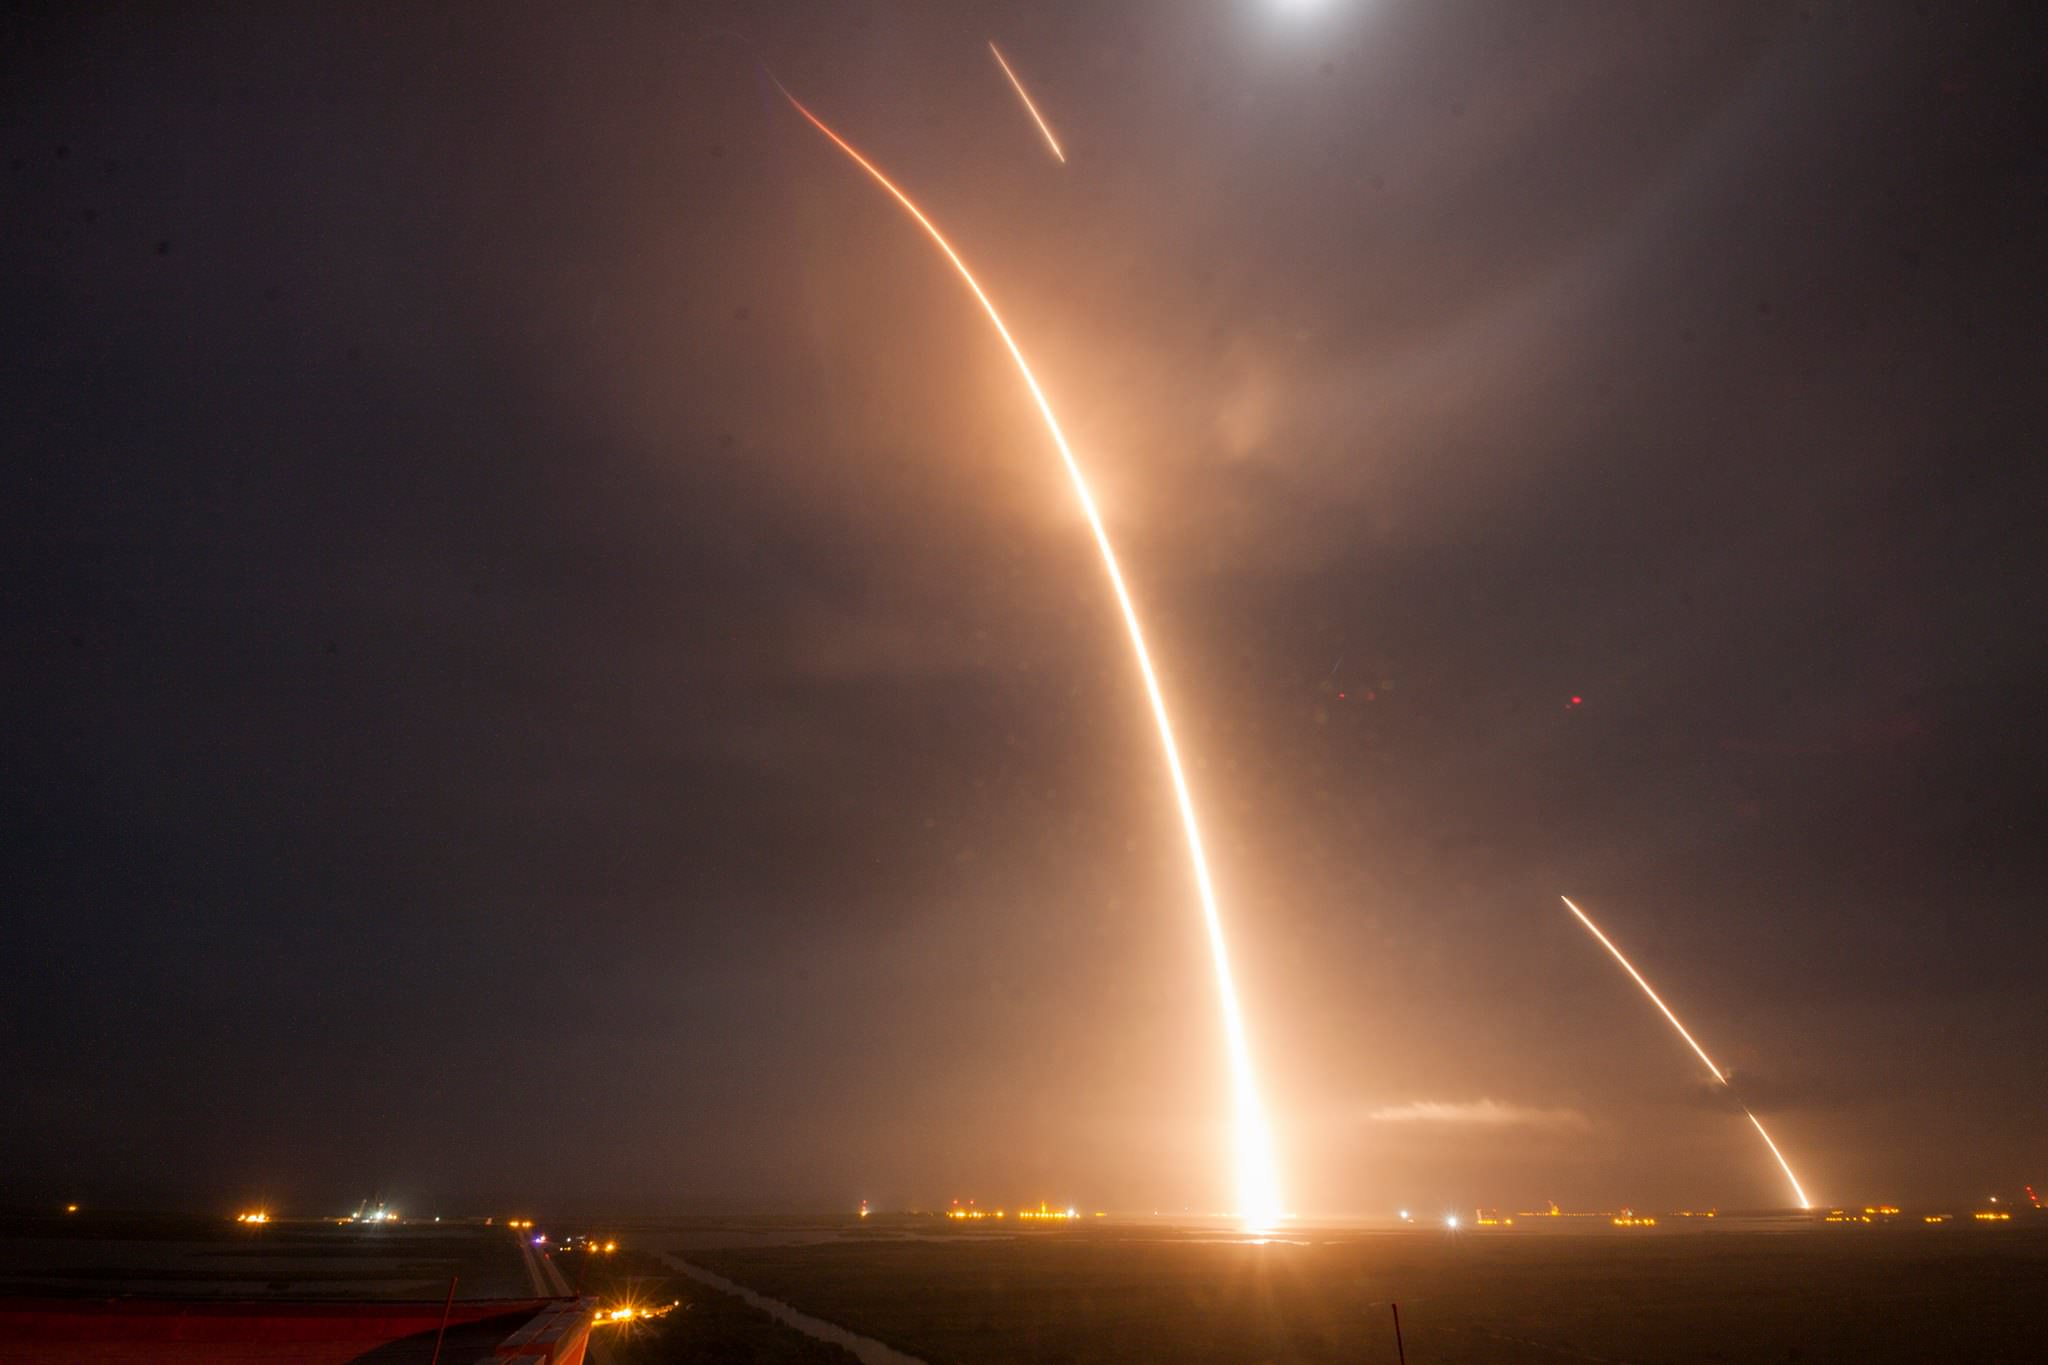 Long exposure of launch, re-entry, and landing burns of SpaceX Falcon 9 on Dec. 21, 2015. Credit: SpaceX